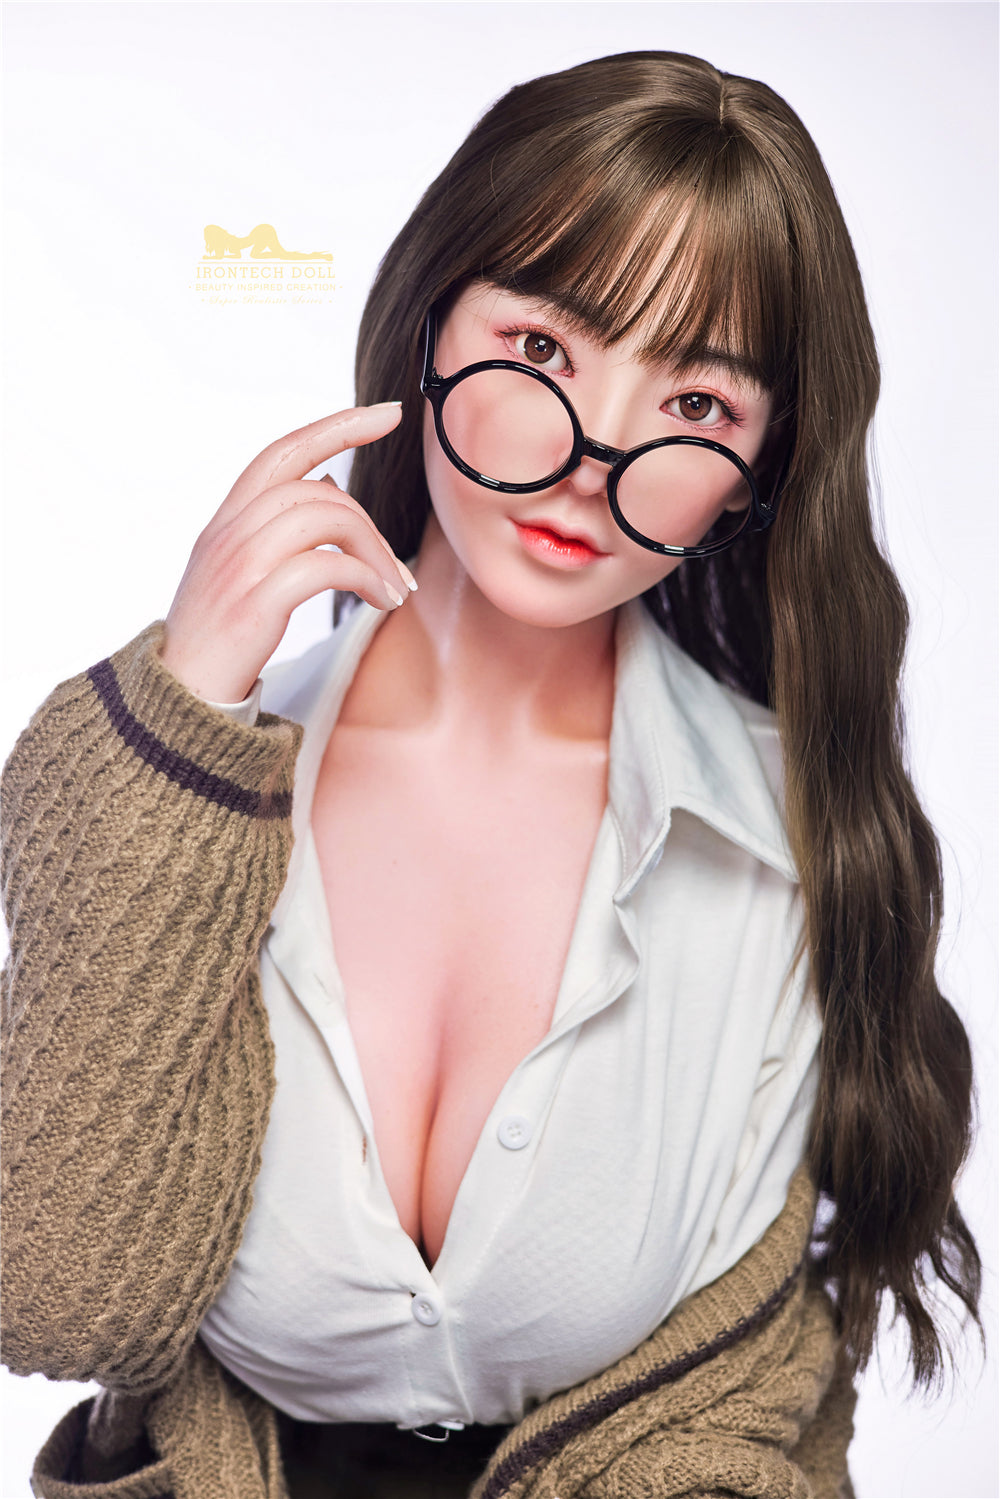 Irontech Doll 153 cm Silicone - Clementine | Sex Dolls SG